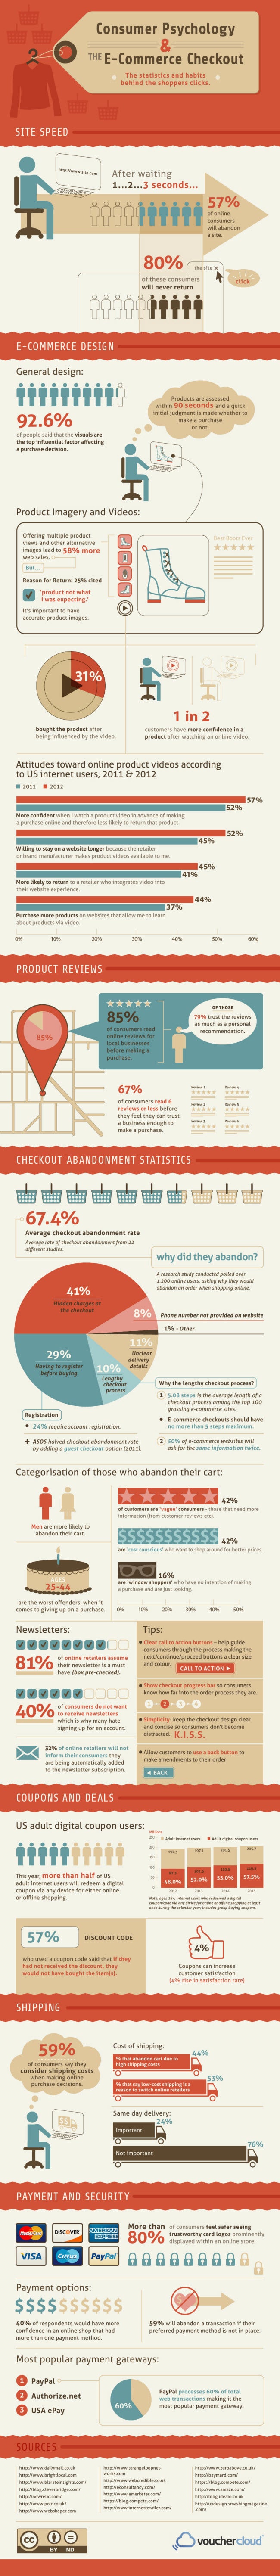 Consumer Psychology and ECommerce Checkouts Infographic